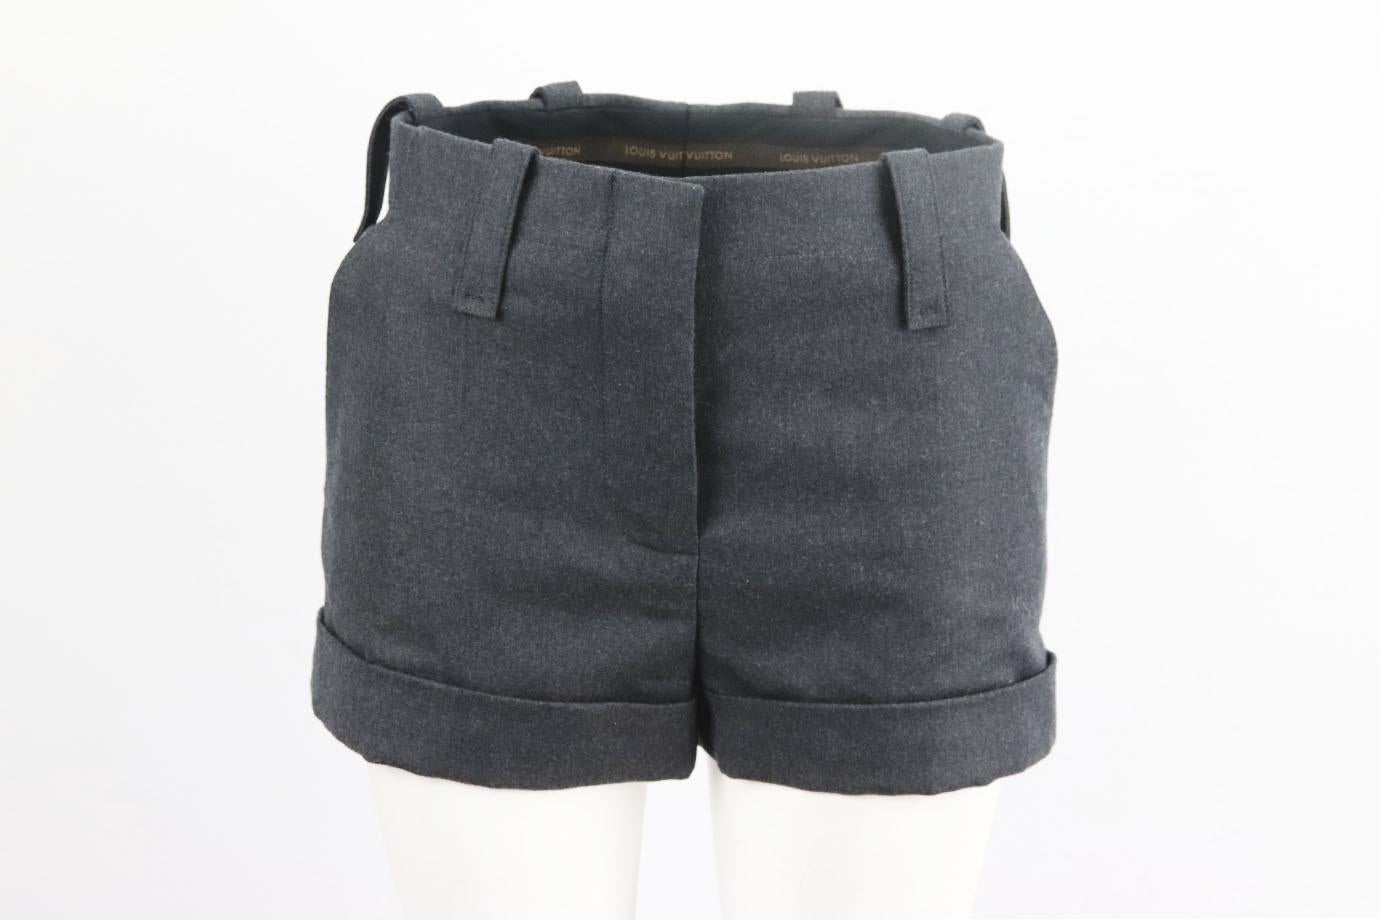 Louis Vuitton wool blend shorts. Grey. Hook and zip fastening at front. 98% Wool, 2% elastane; lining: 60% viscose, 35% cupro, 5% elastane. Size: FR 34 (UK 6, US 2, IT 38). Waist: 27 in. Hips: 38 in. Length: 11.5 in. Inseam: 2 in. Rise: 10.5 in
